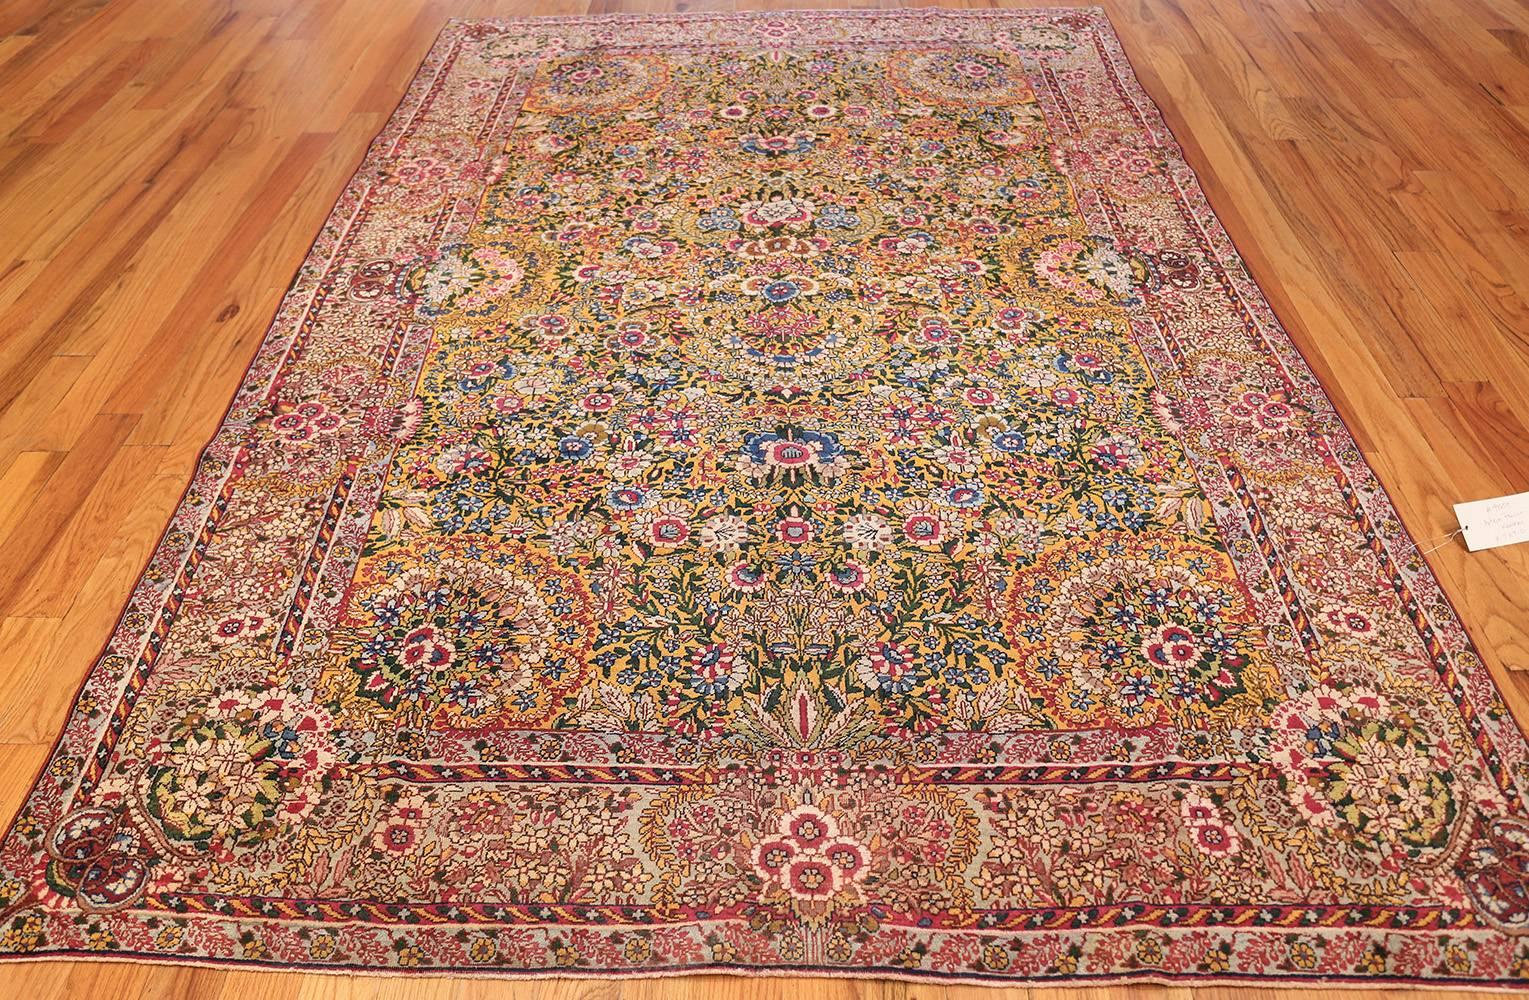 Kerman rugs. Since the 17th century, Kerman has been a major center for the production of high-quality carpets. The so-called Vase Carpets of the Safavid period are among the greatest masterpieces of Persian weaving. When Persian rug production